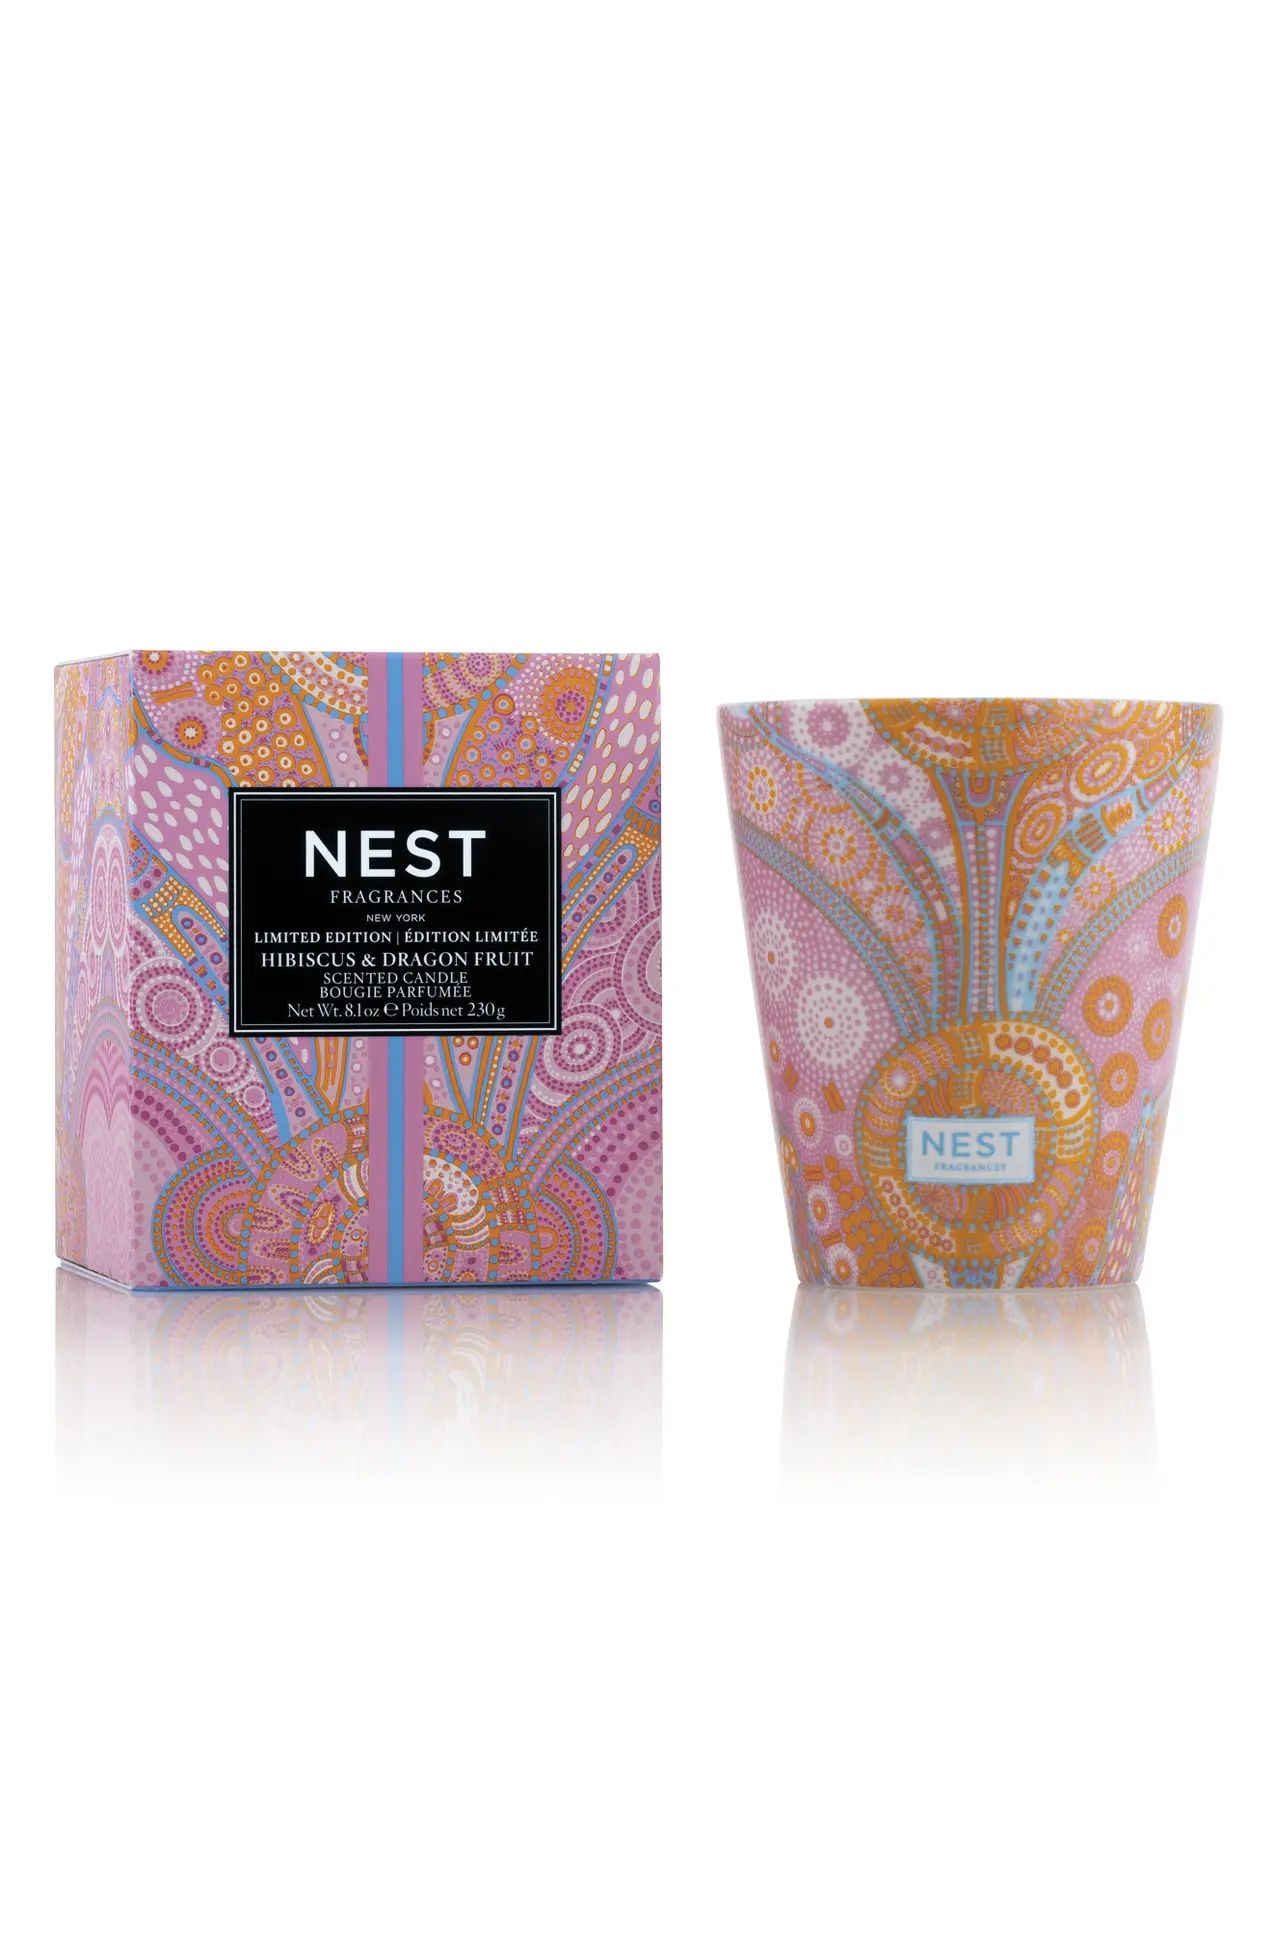 Hibiscus & Dragon Fruit Candle | Nordstrom Rack